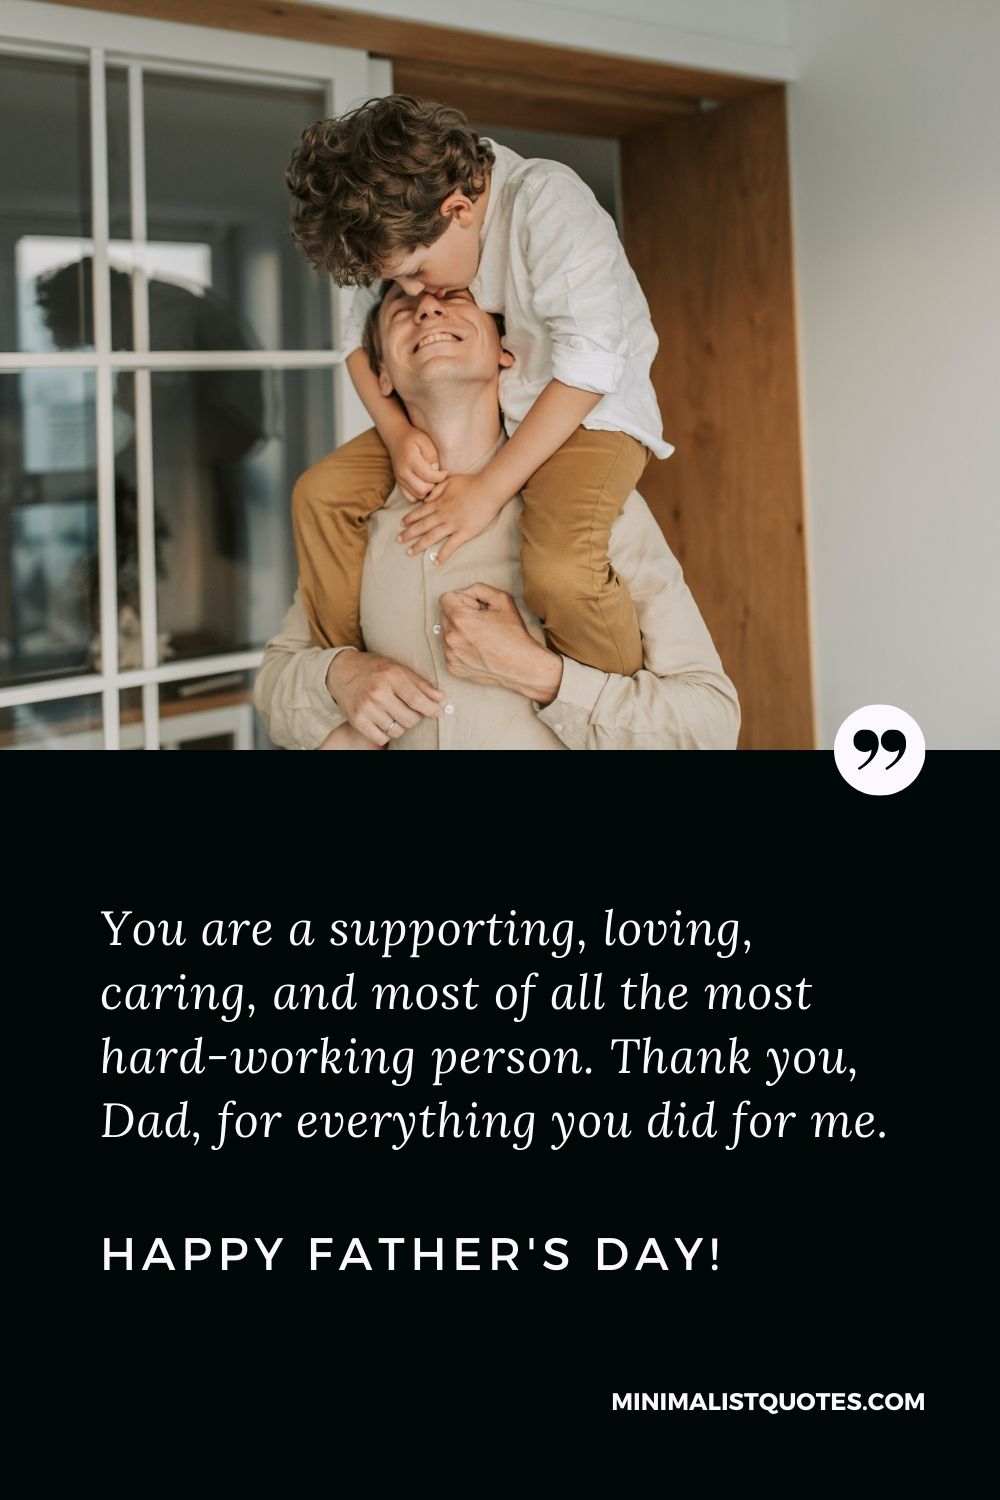 Fathers Day Quote, Wish & Message With Image: You are a supporting, loving, caring, and most of all the most hard-working person. Thank you, Dad, for everything you did for me. Happy Fathers Day!